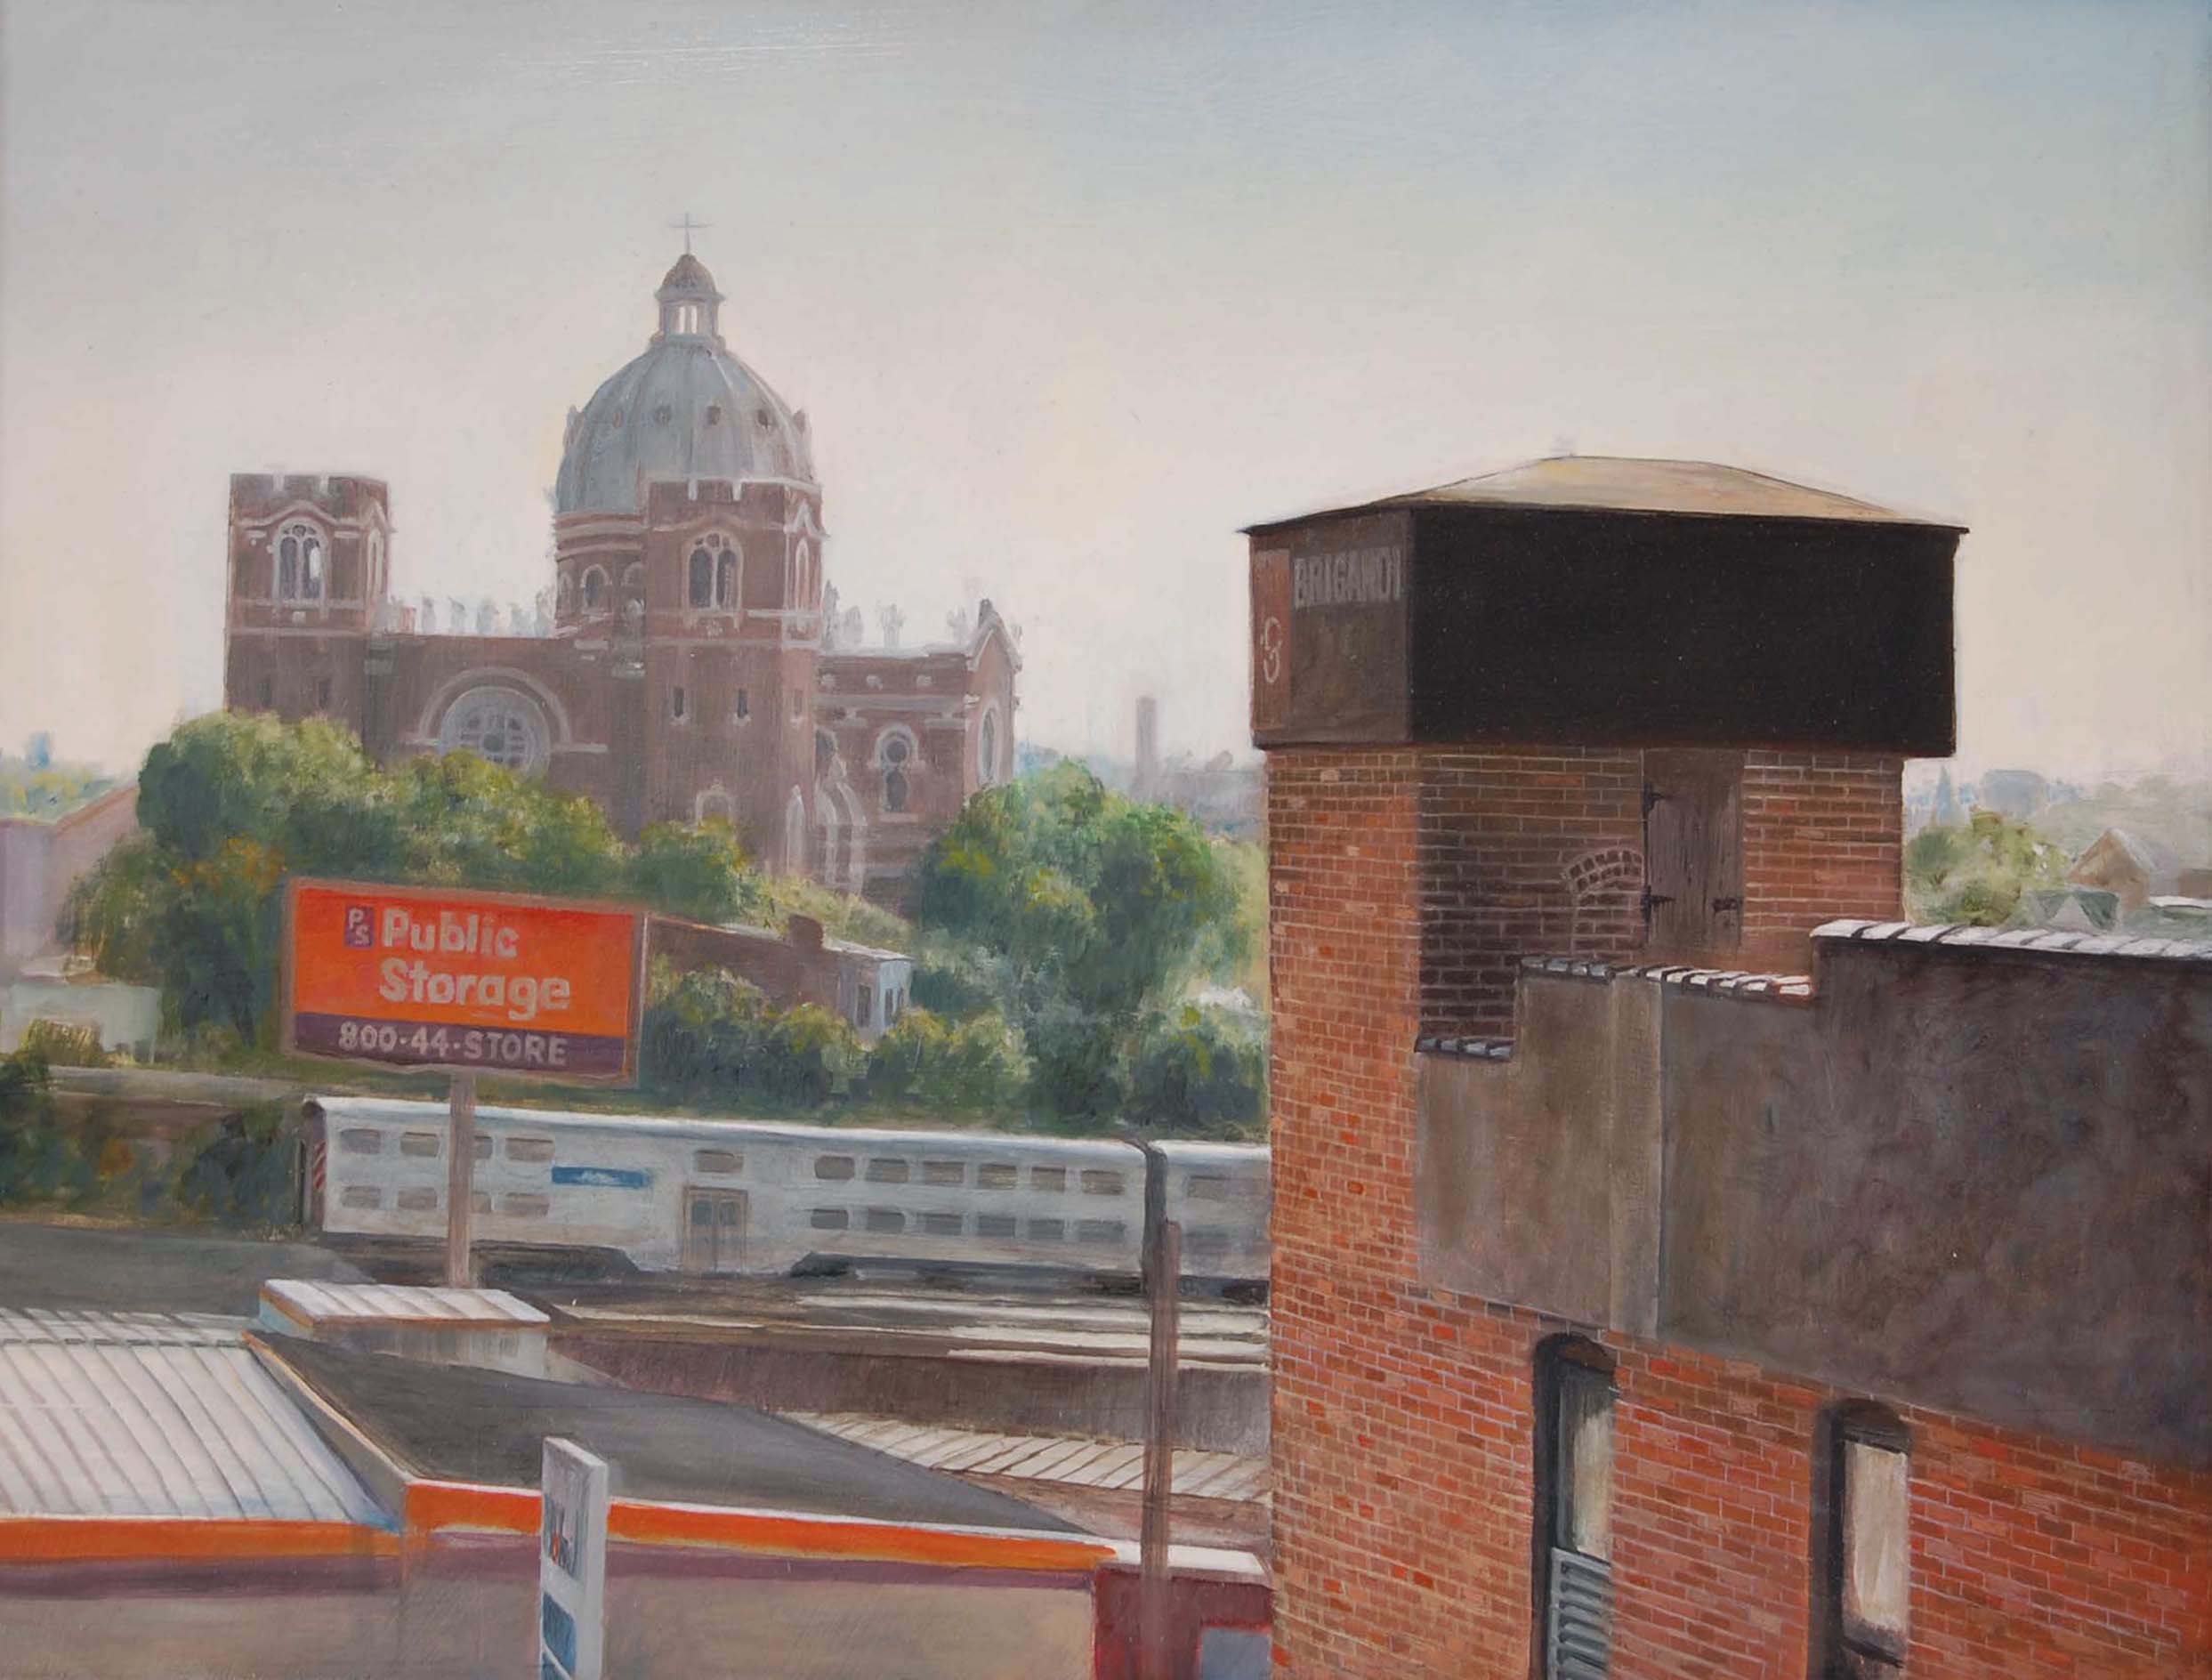   View toward Saint Mary's    from Mendell Street Studio   2012  Oil on panel  11.5 x 15.25 inches    